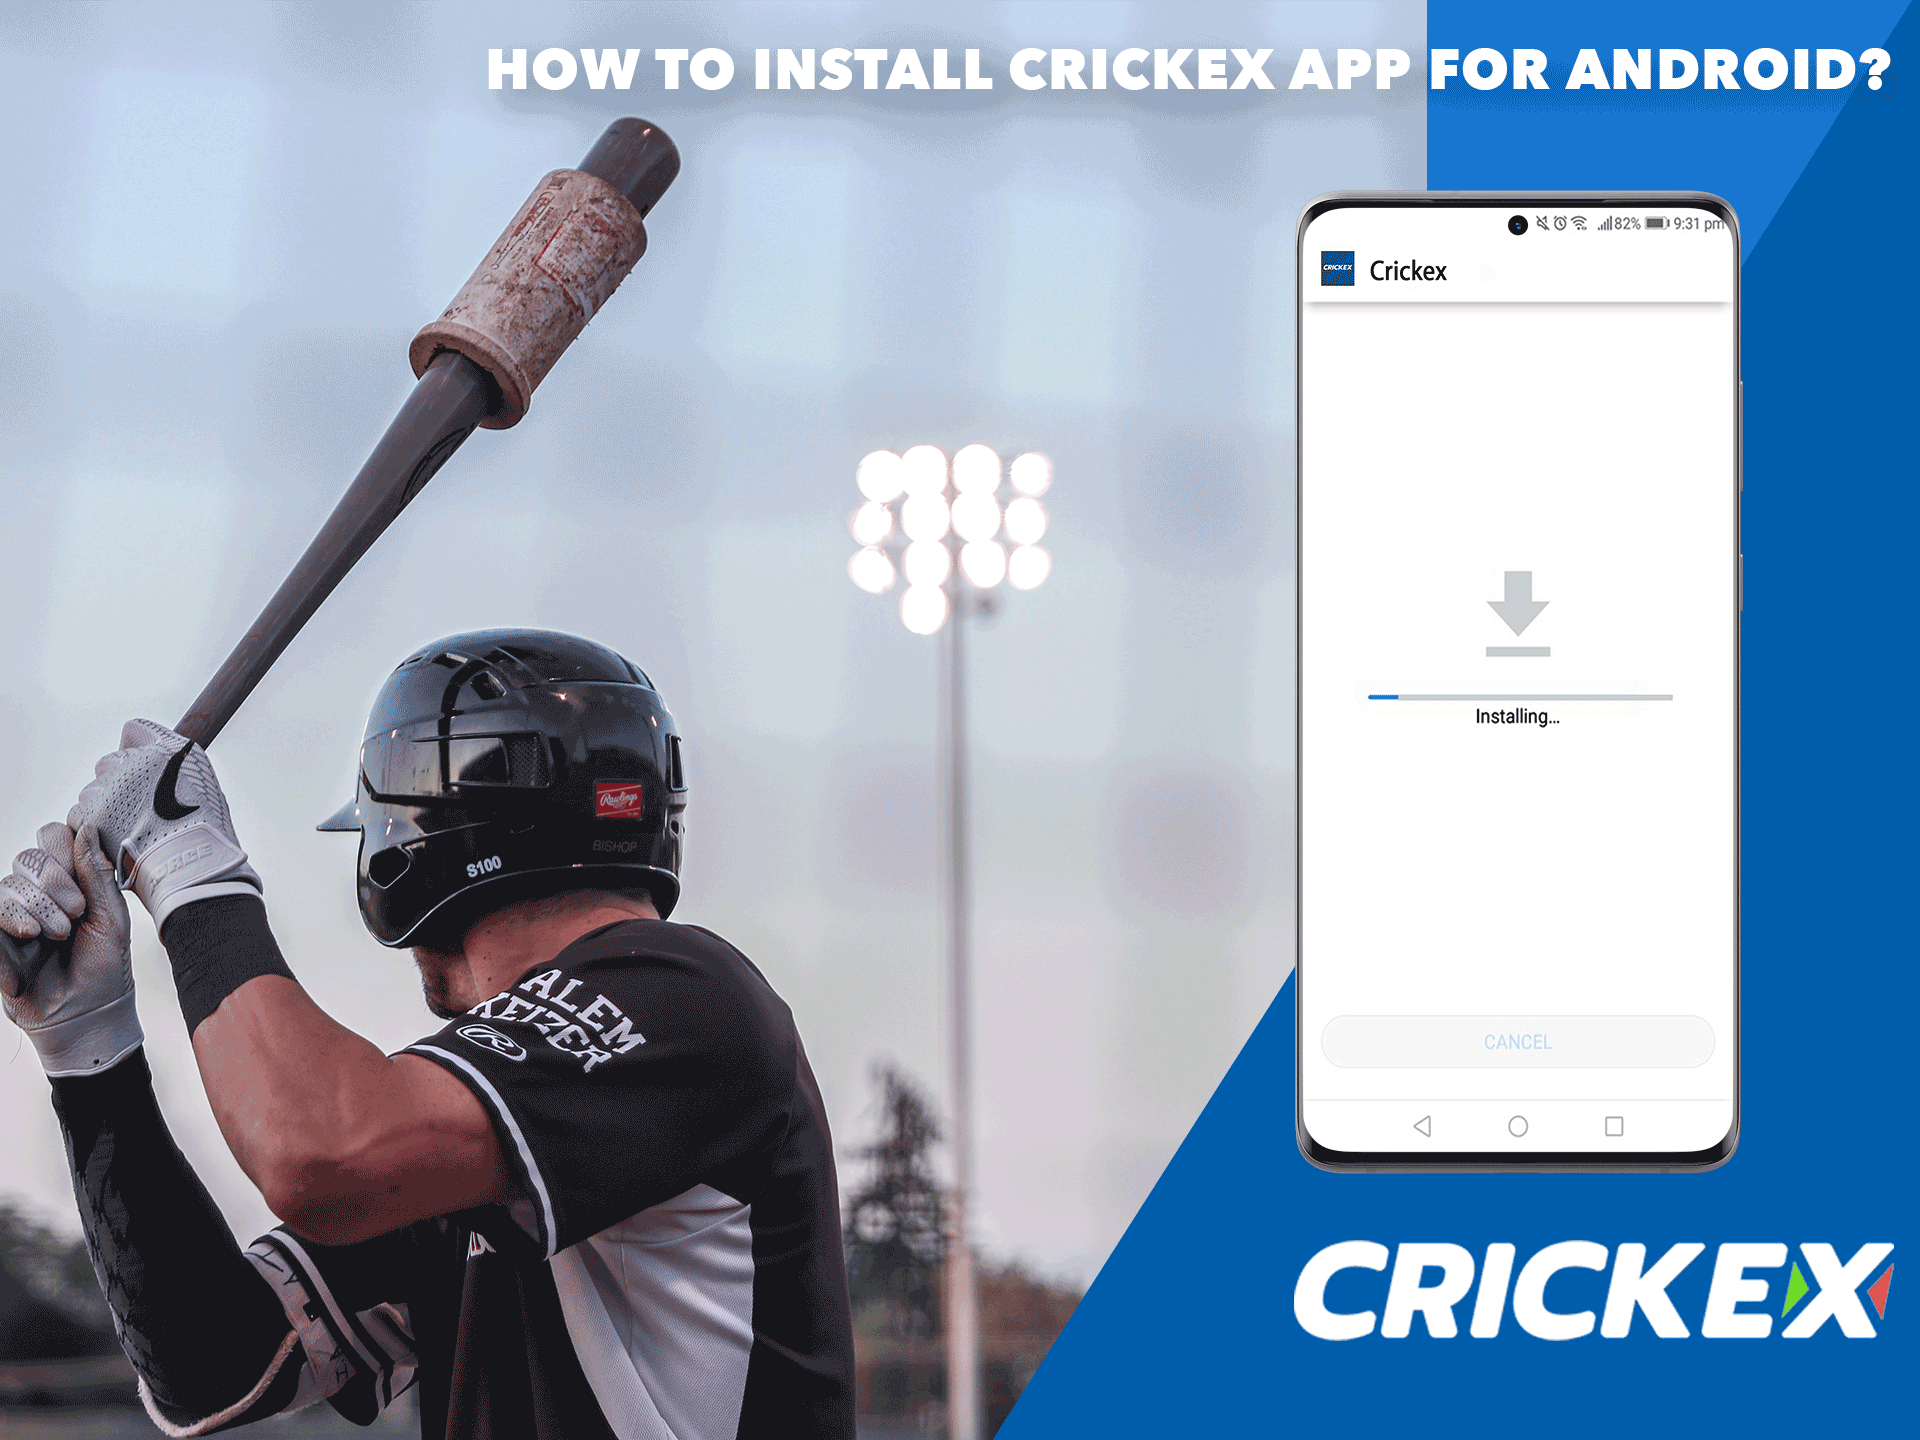 To install the Crickex app, you need to download the APK file.